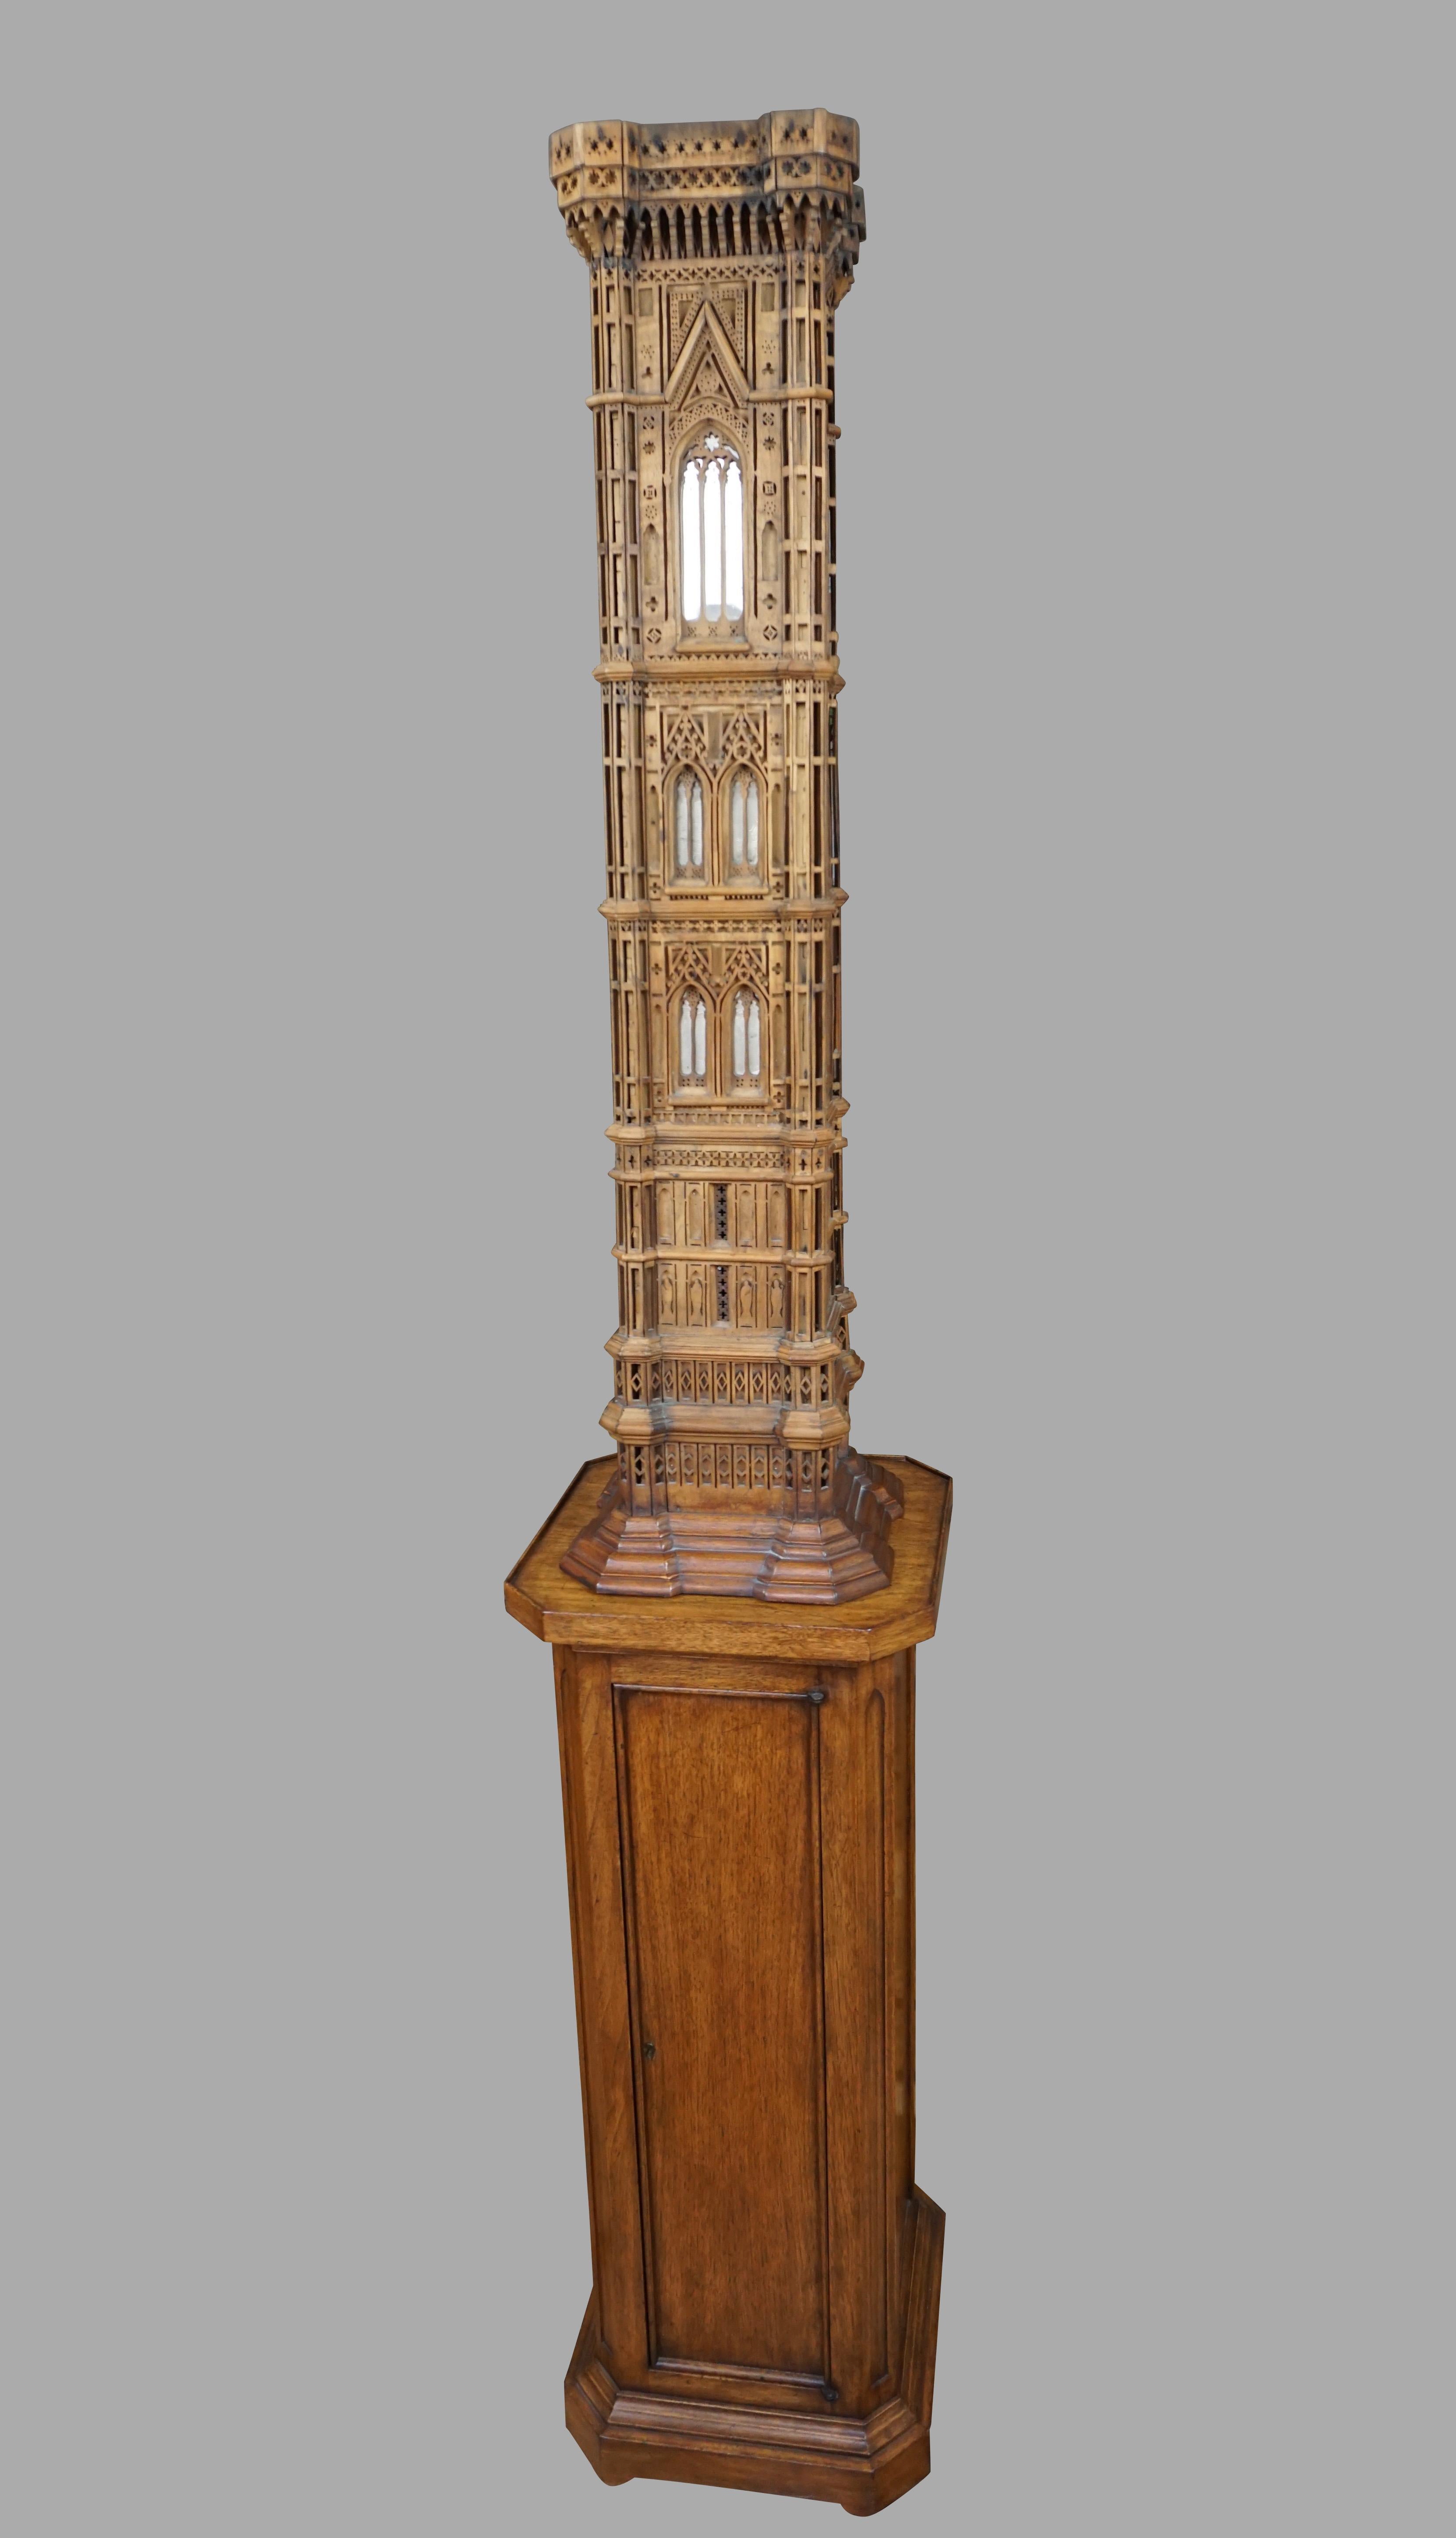 A spectacular and finely executed Marquette of Giotto's famous campanile in Florence, Italy. This carved and reticulated walnut model of the bell tower has mirrored inserts and remains in very good overall condition. It is a faithful representation